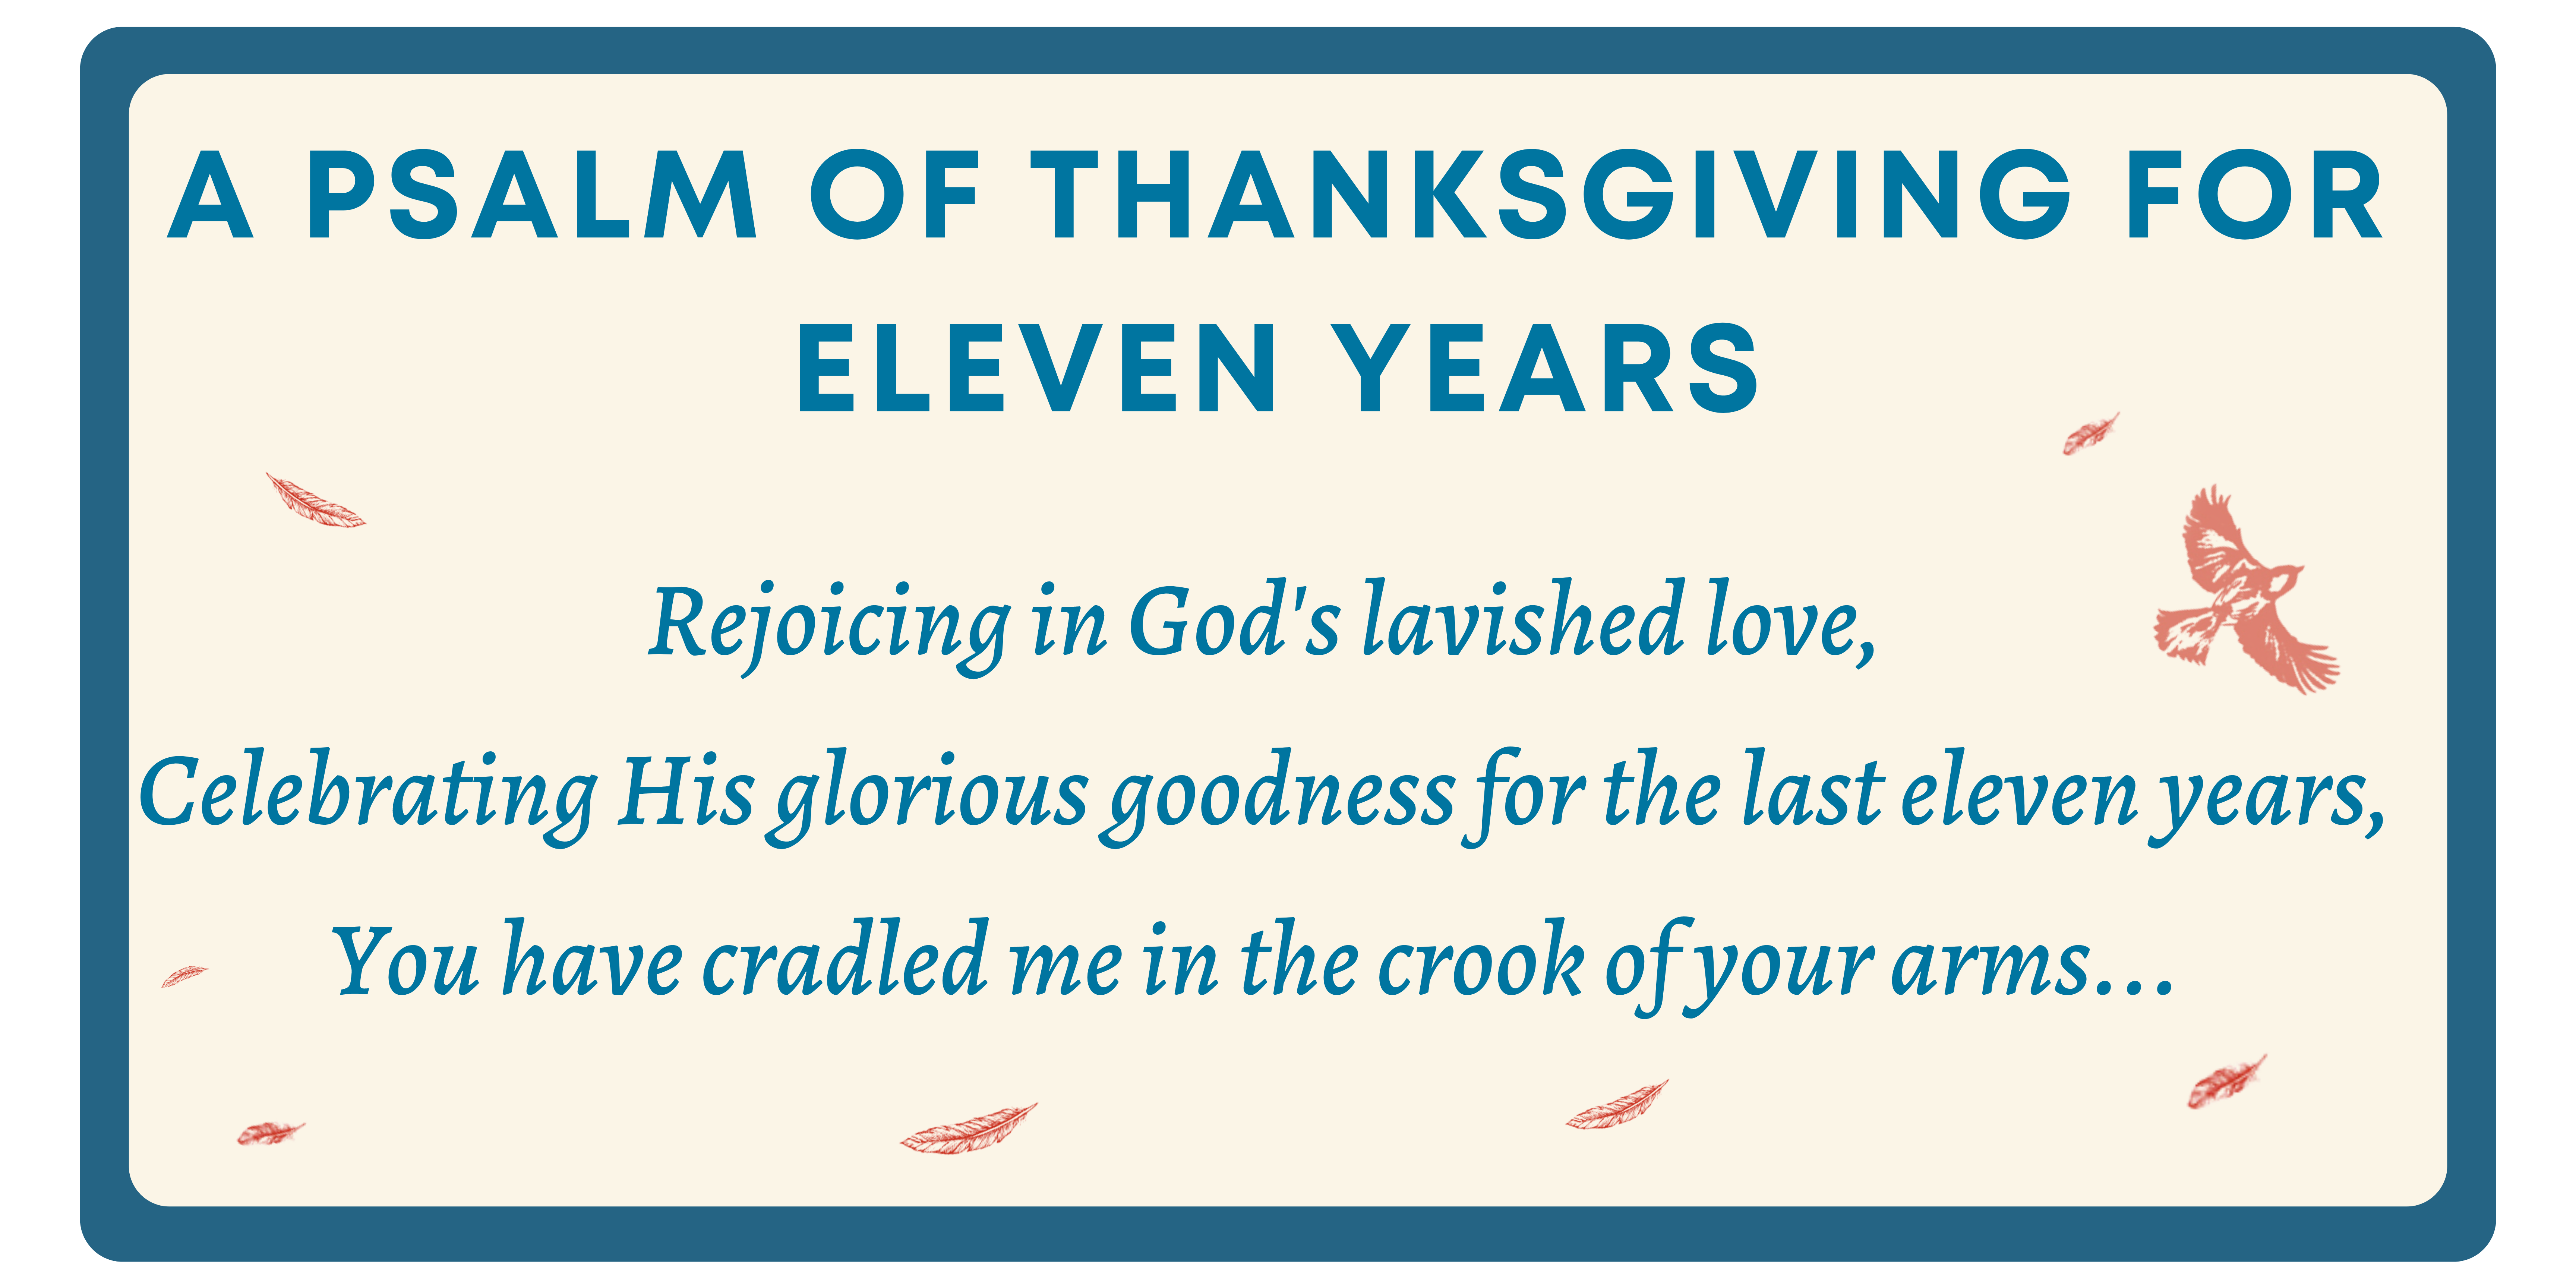 a psalm of thanksgiving poem image